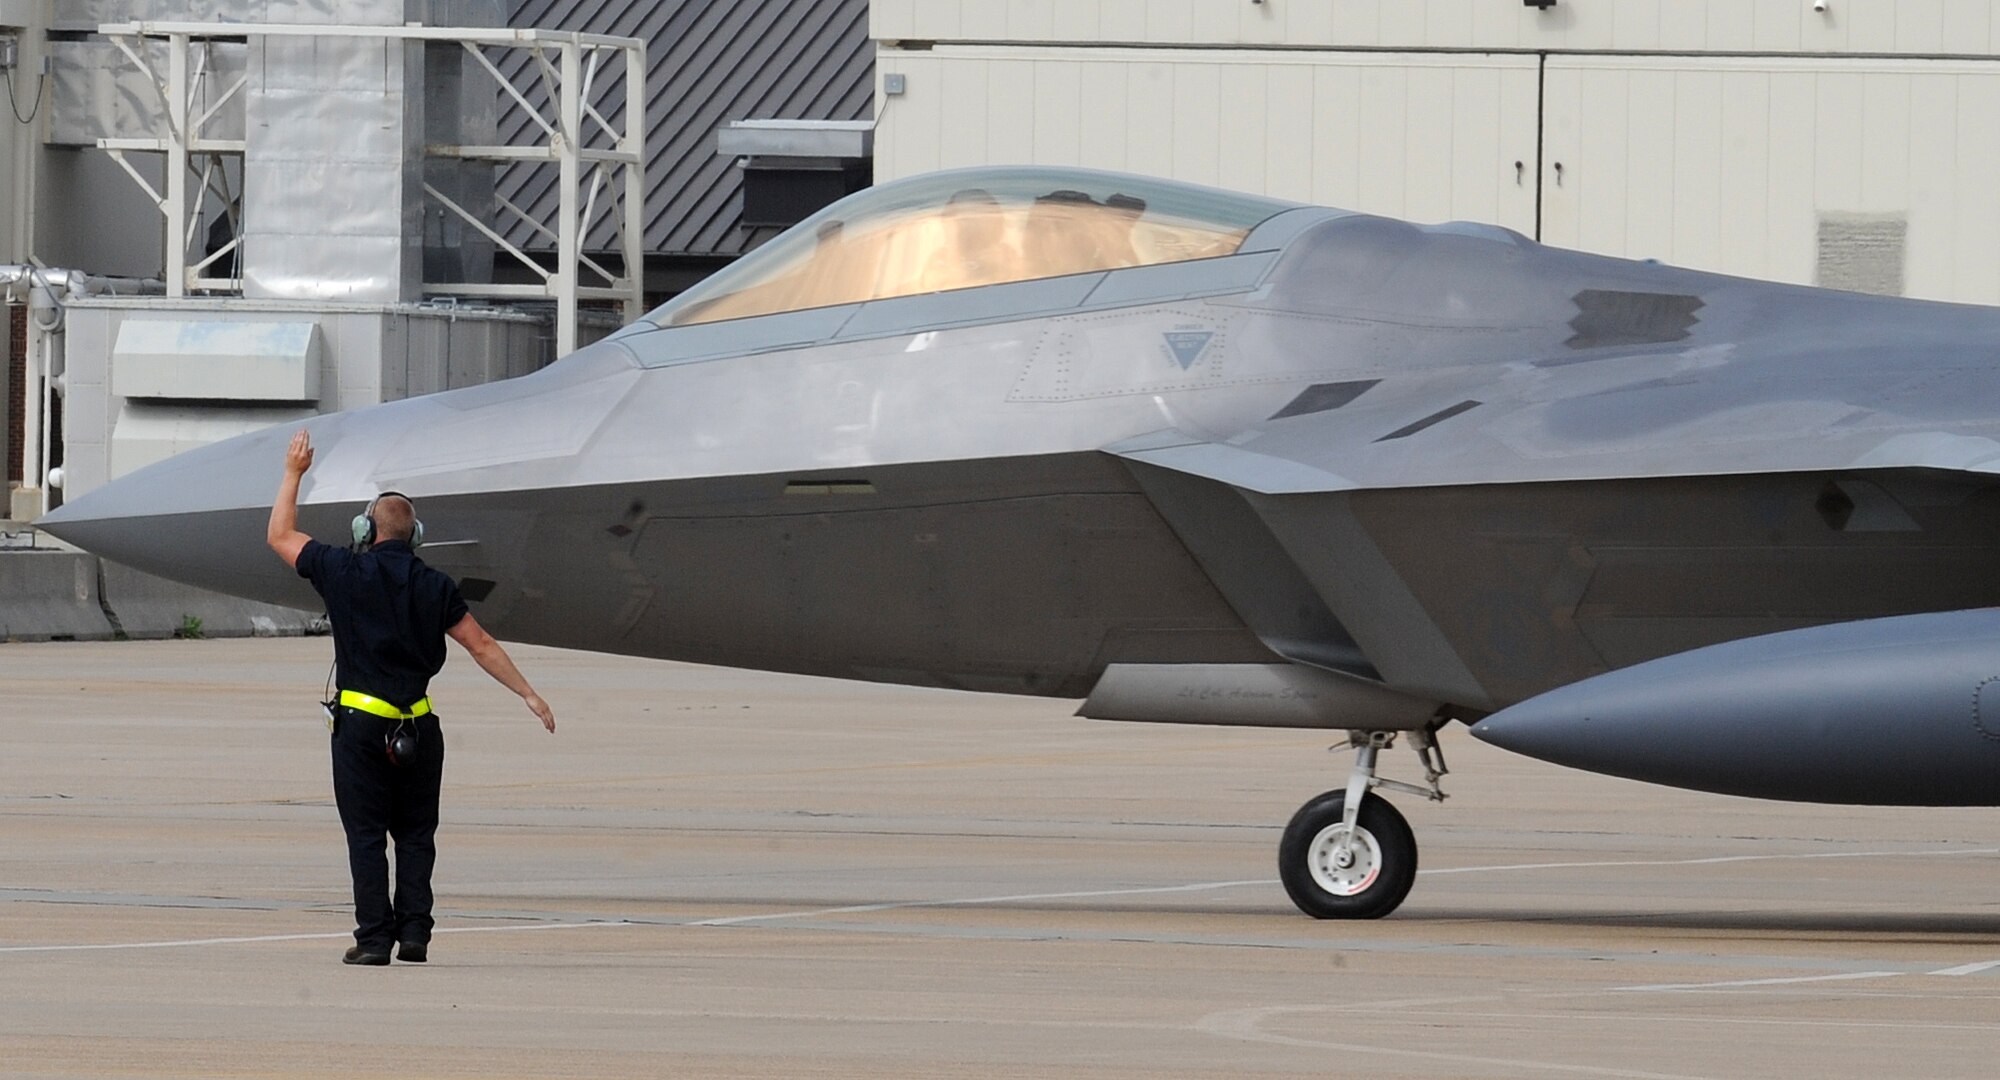 LANGLEY AIR FORCE BASE, Va. – A crew chief signals an F-22A Raptor from the 94th Fighter Squadron to taxi in preparation for departure to Kadena Air Base, Japan, May 26.  More than 280 Langley Airmen and 12 F-22A Raptors depart this week for their Air Expeditionary Force deployment, which demonstrates the continued U.S. commitment to fulfill its security responsibilities throughout the Western Pacific..  This is the first overseas deployment for the 94th Fighter Squadron since transitioning to the F-22.  (U.S. Air Force photo/Senior Airman Zachary Wolf)